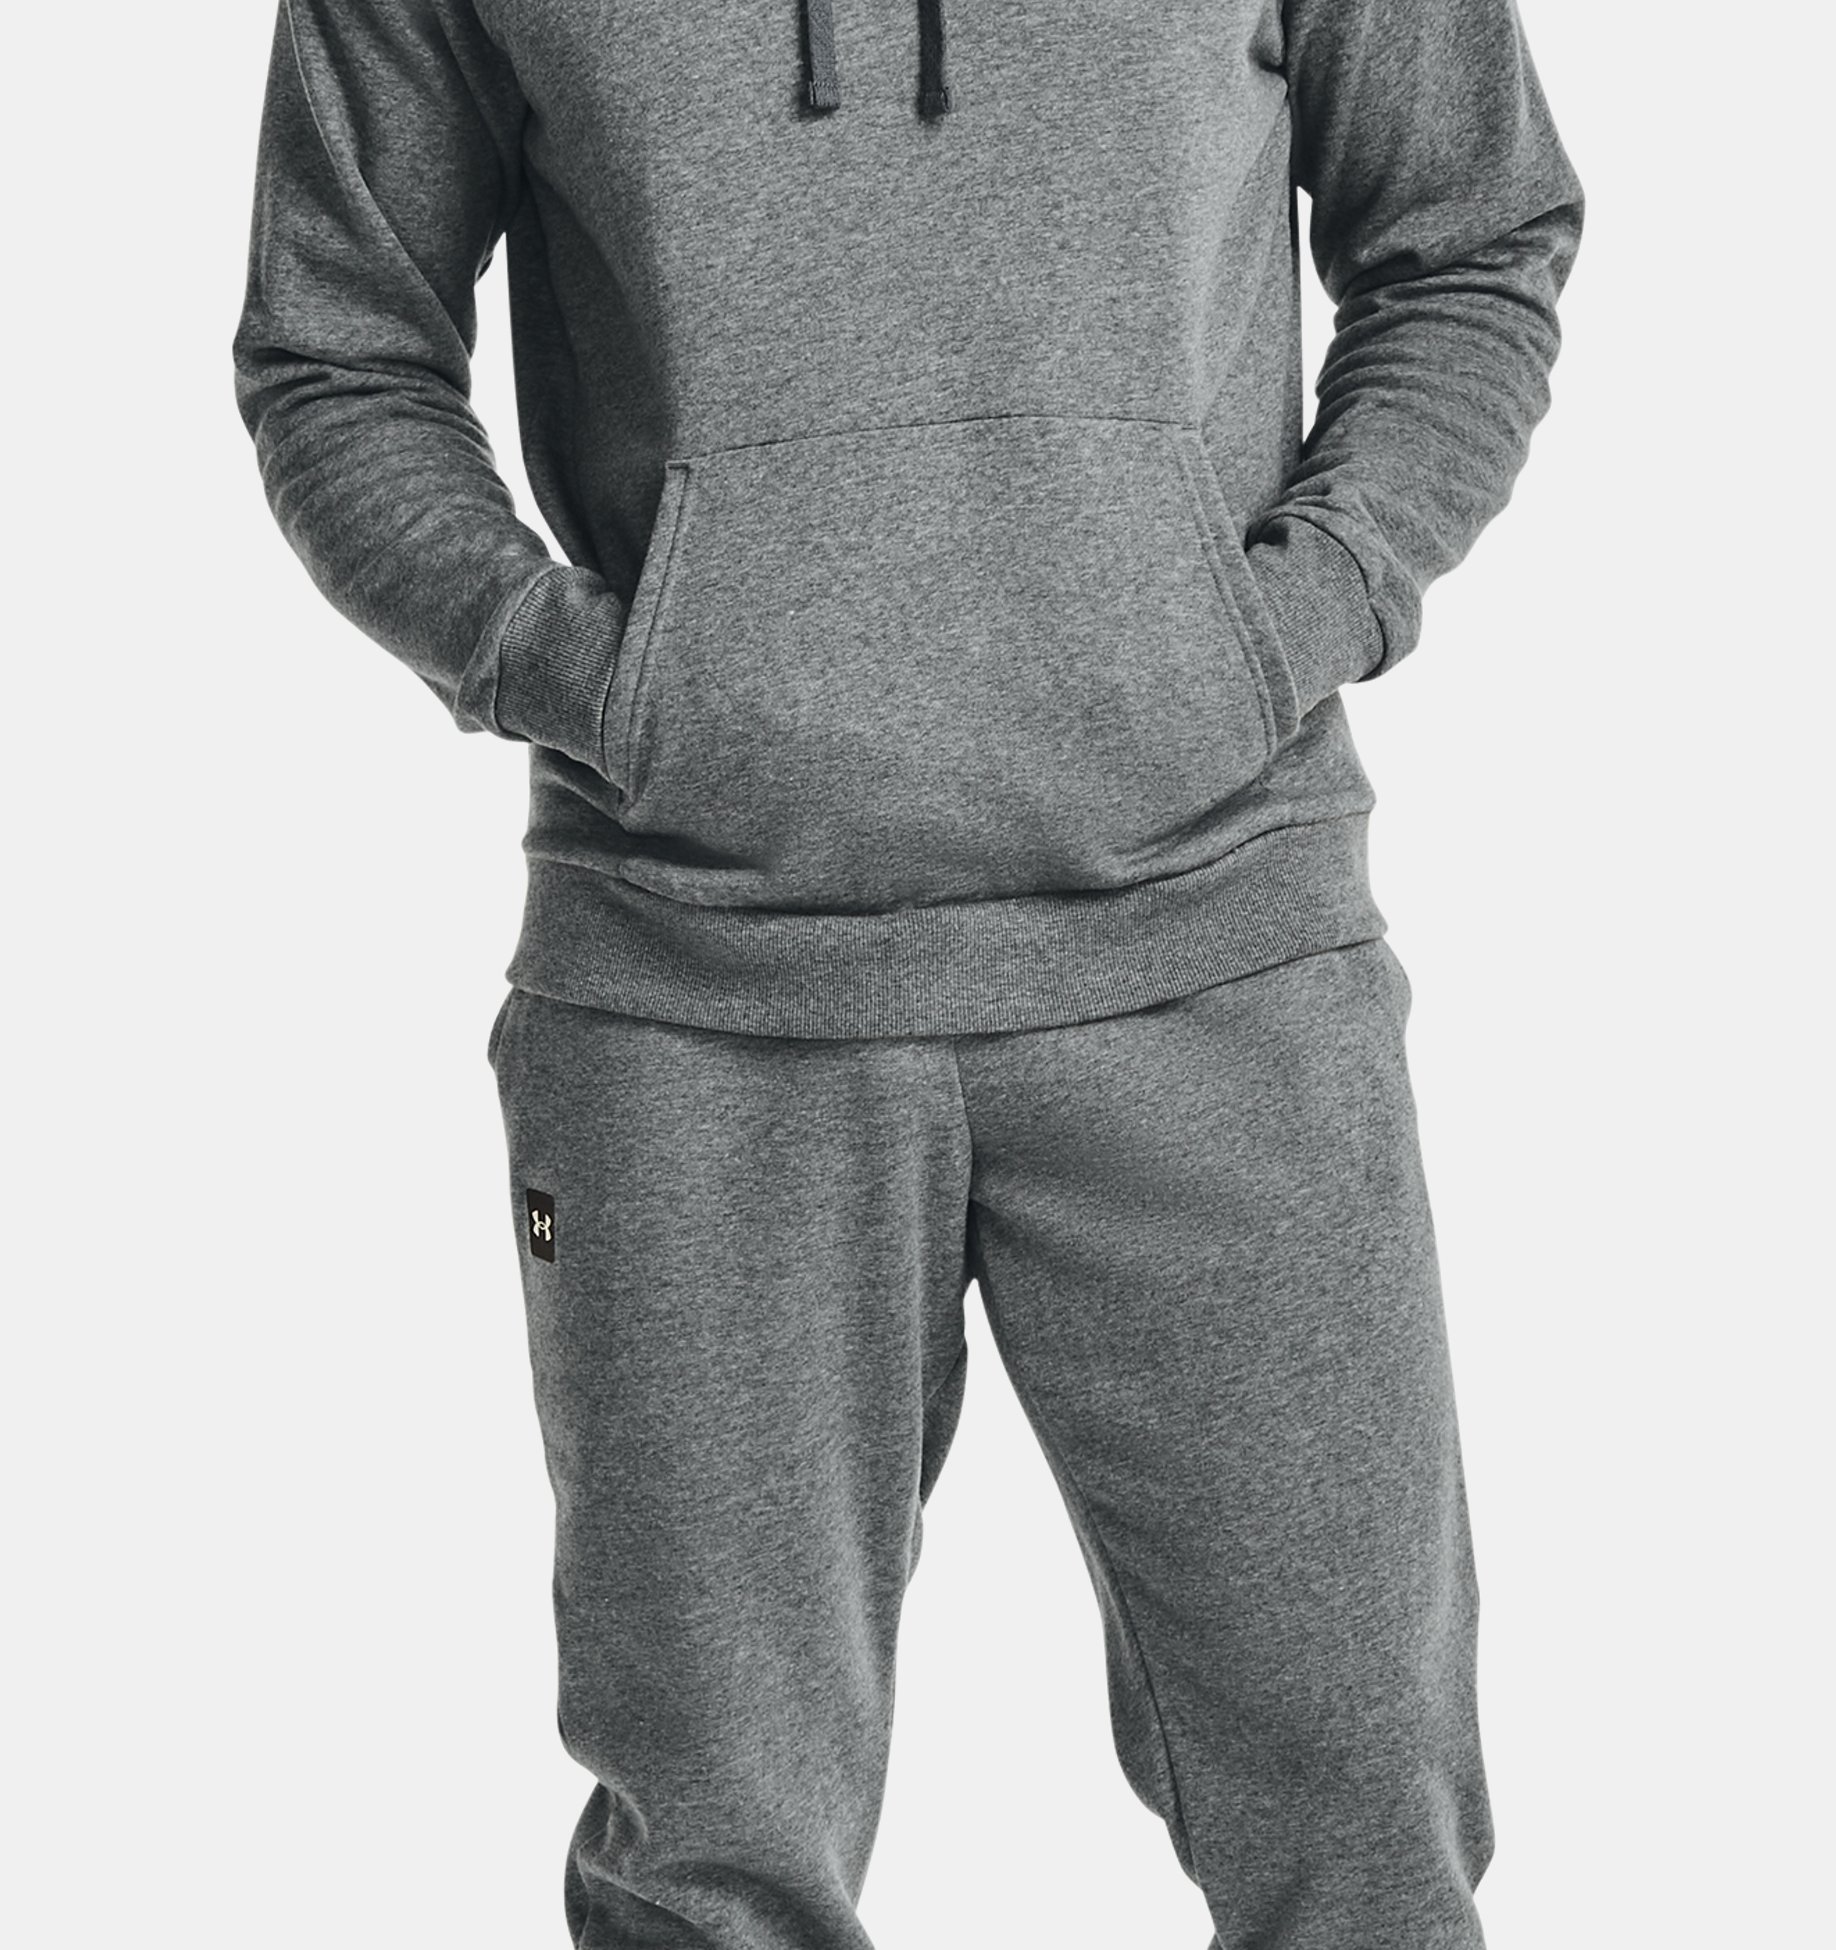  Under Armour Mens Rival Fleece Pants , Black (001)/Onyx White ,  X-Large : Clothing, Shoes & Jewelry